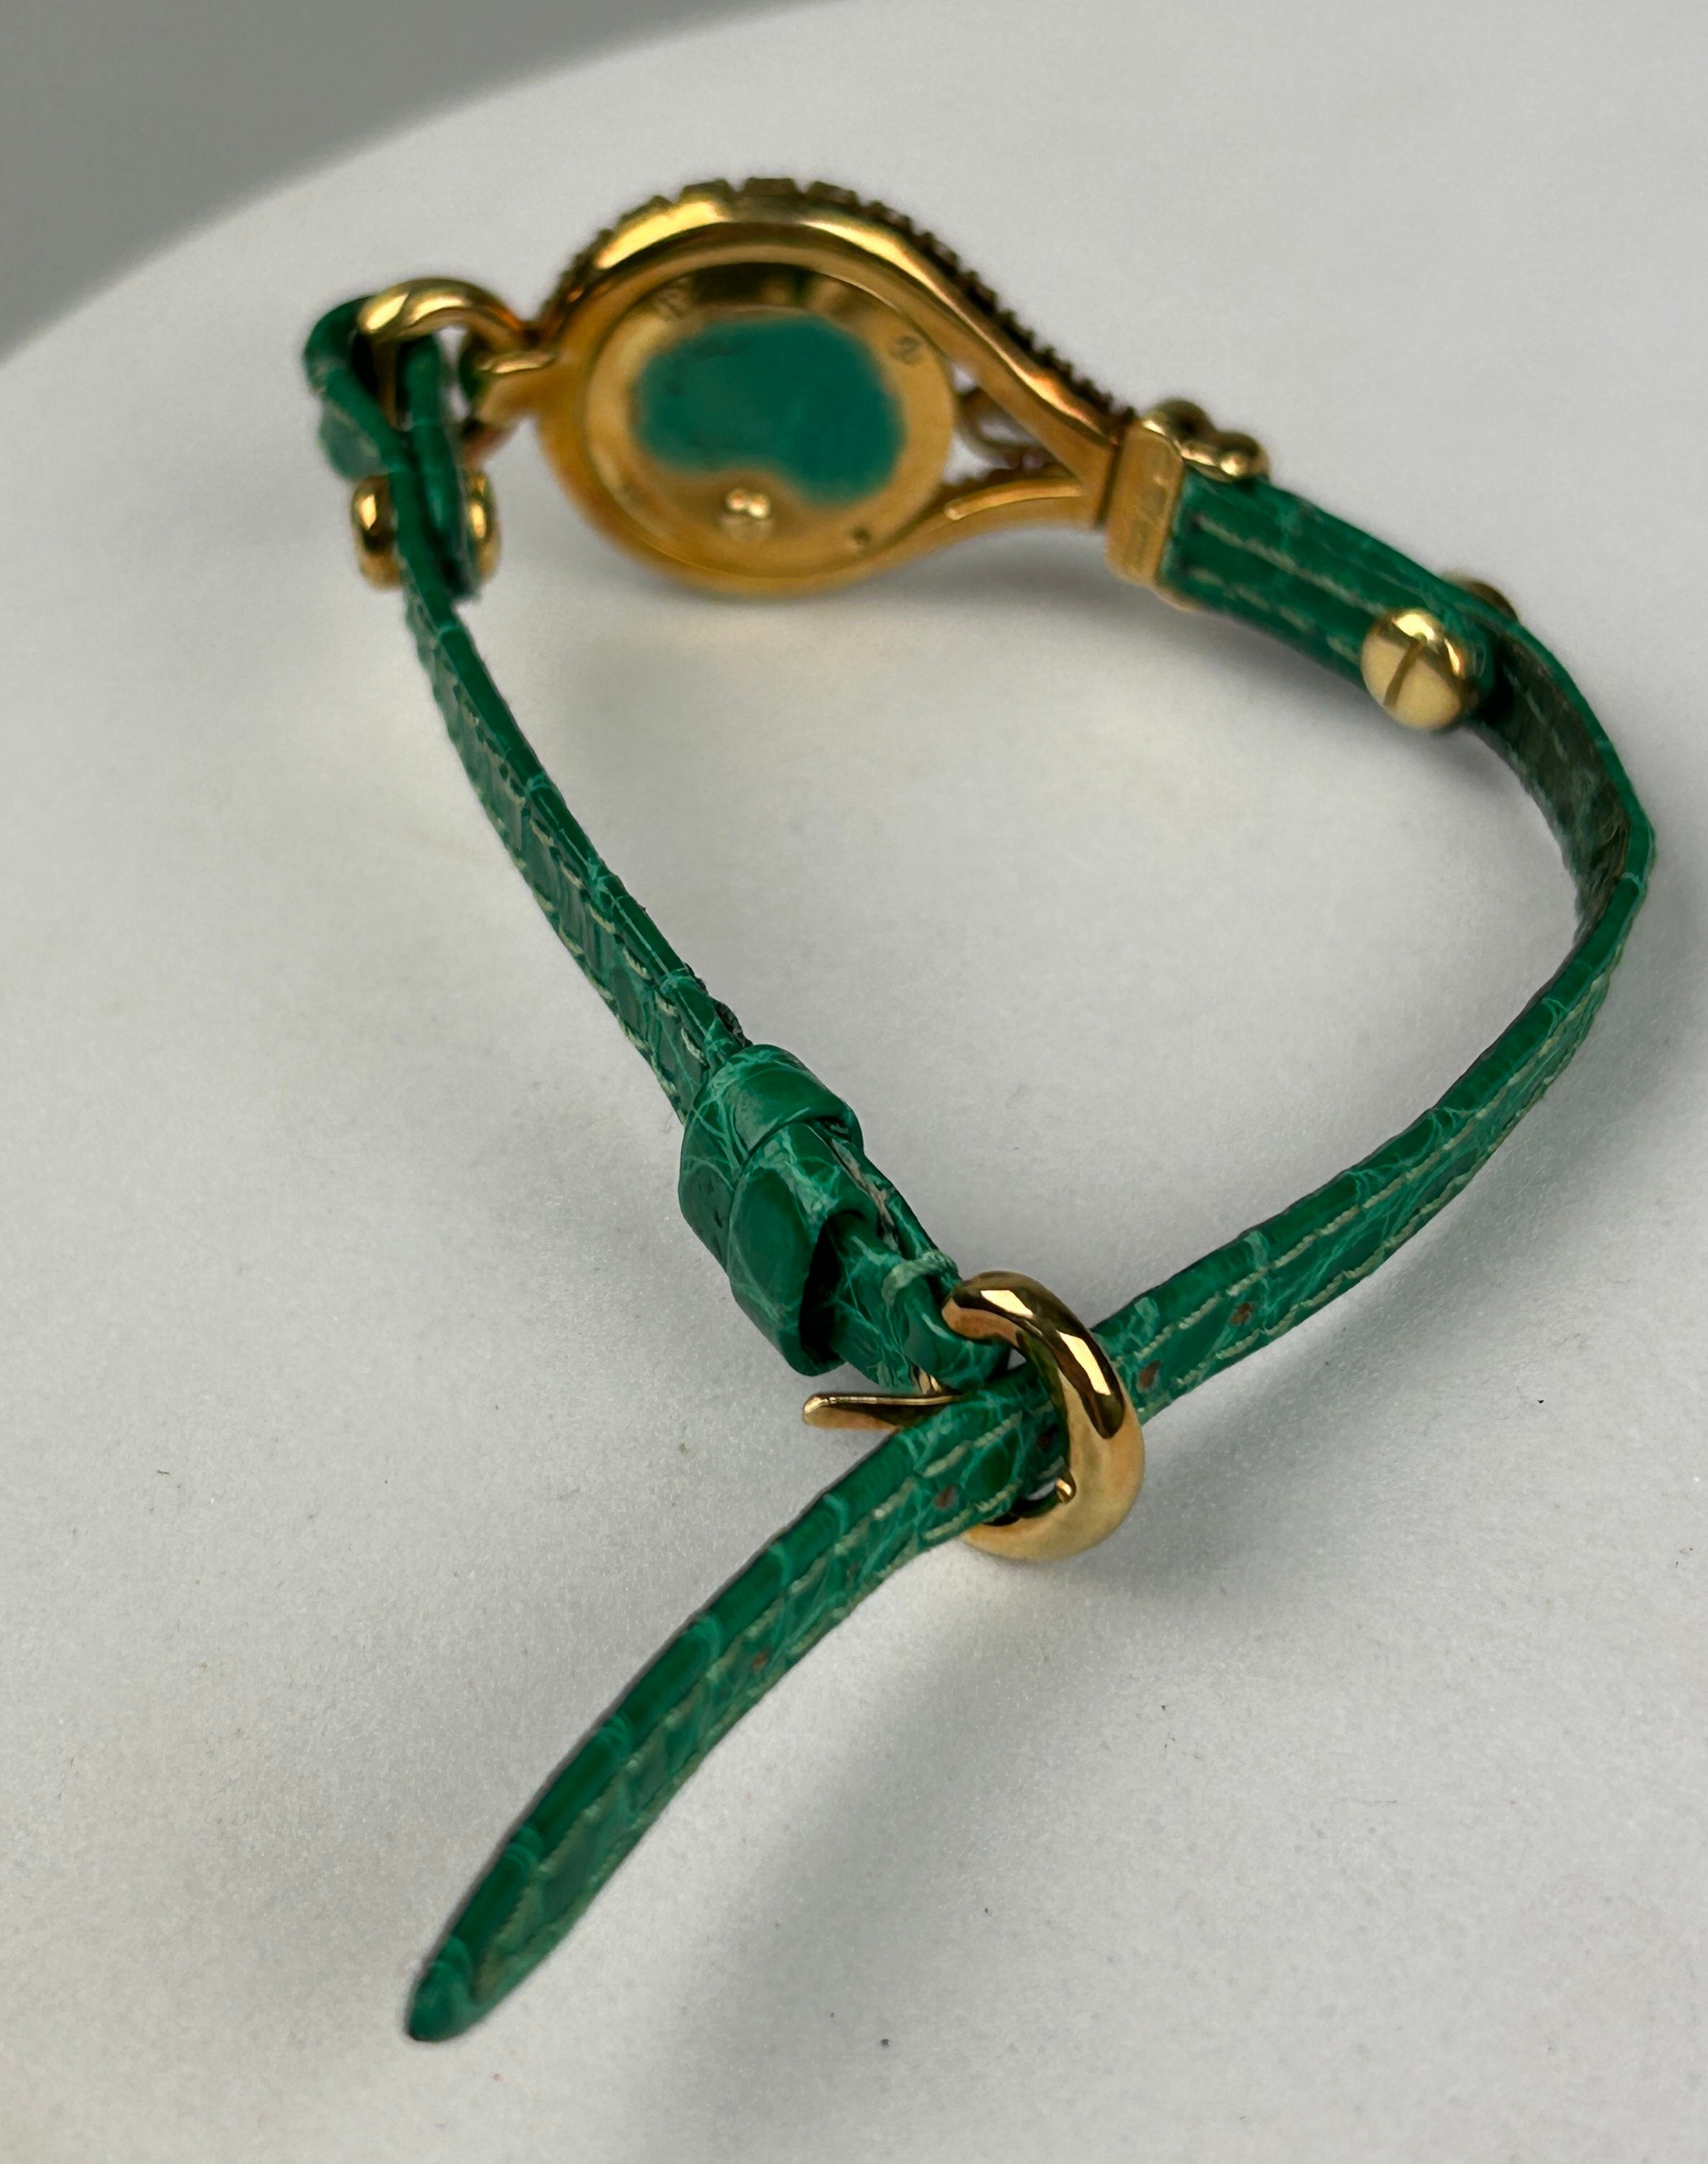 A DIAMOND ETOILE WATCH APPROXIMATELY THREE CARATS IN 14CT GOLD WITH GREEN LEATHER STRAP, - Image 4 of 5